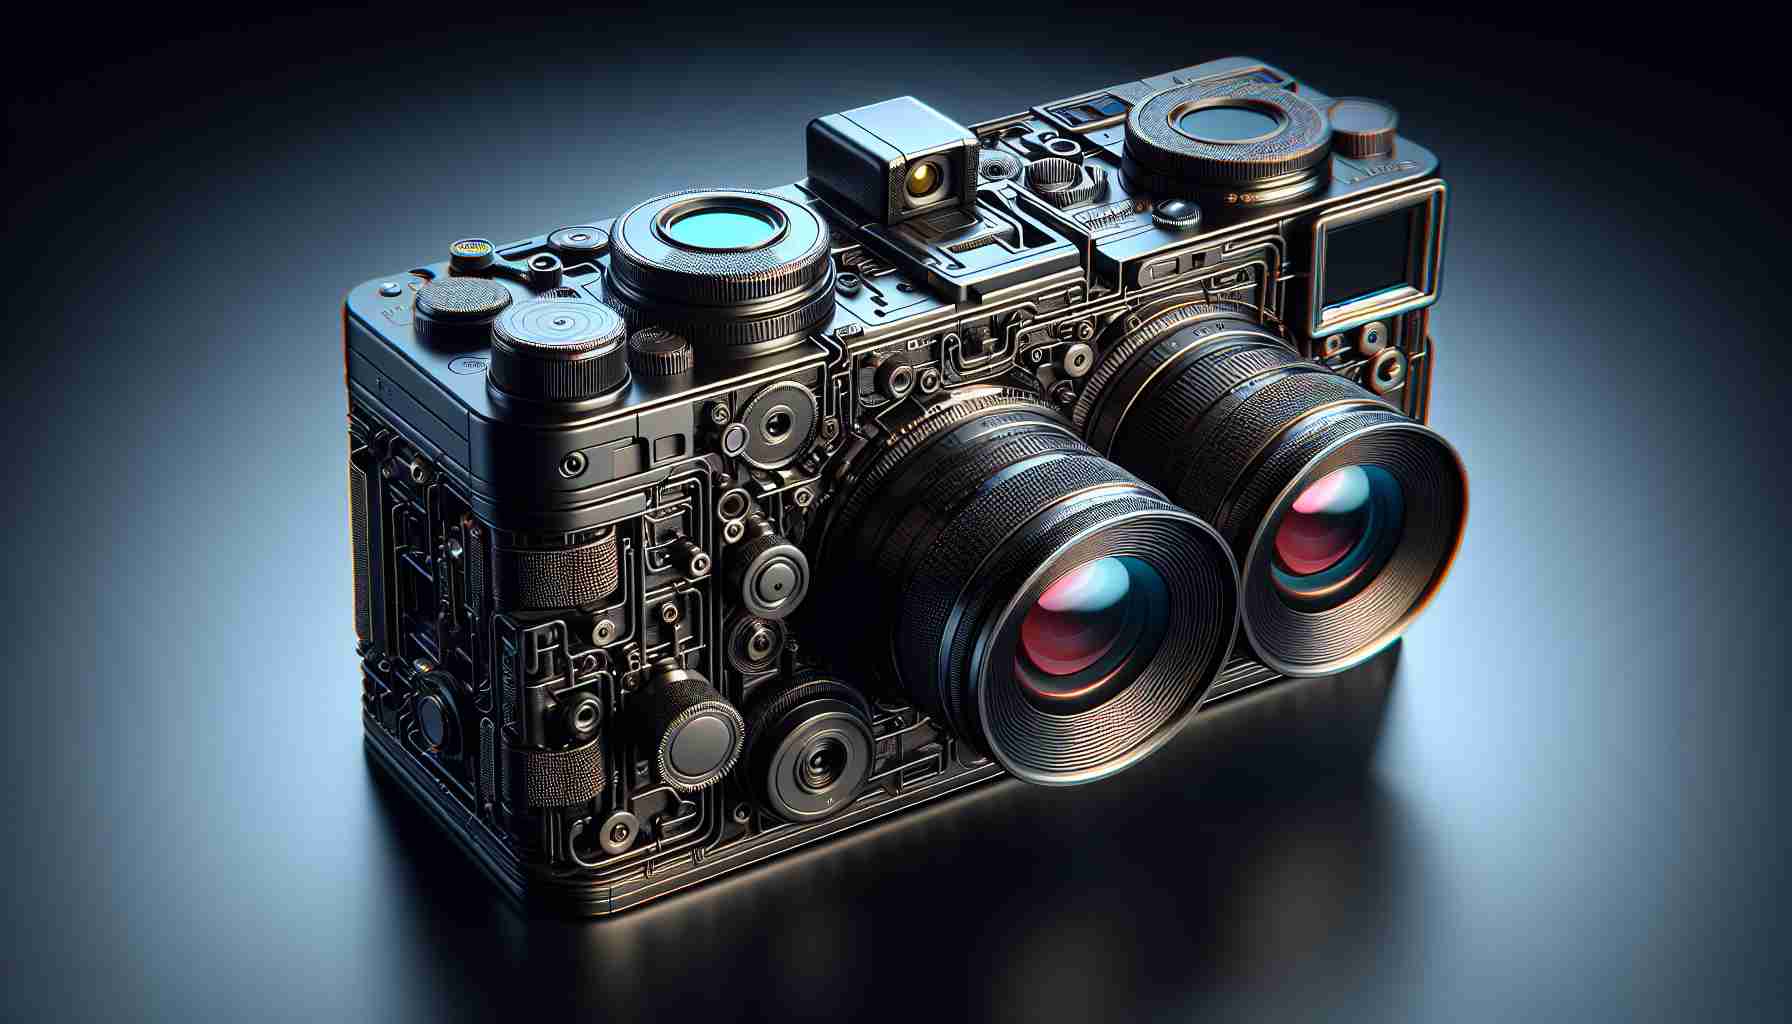 Trending Now: Multi-lens camera shoots digital 3d pictures and captures gifs